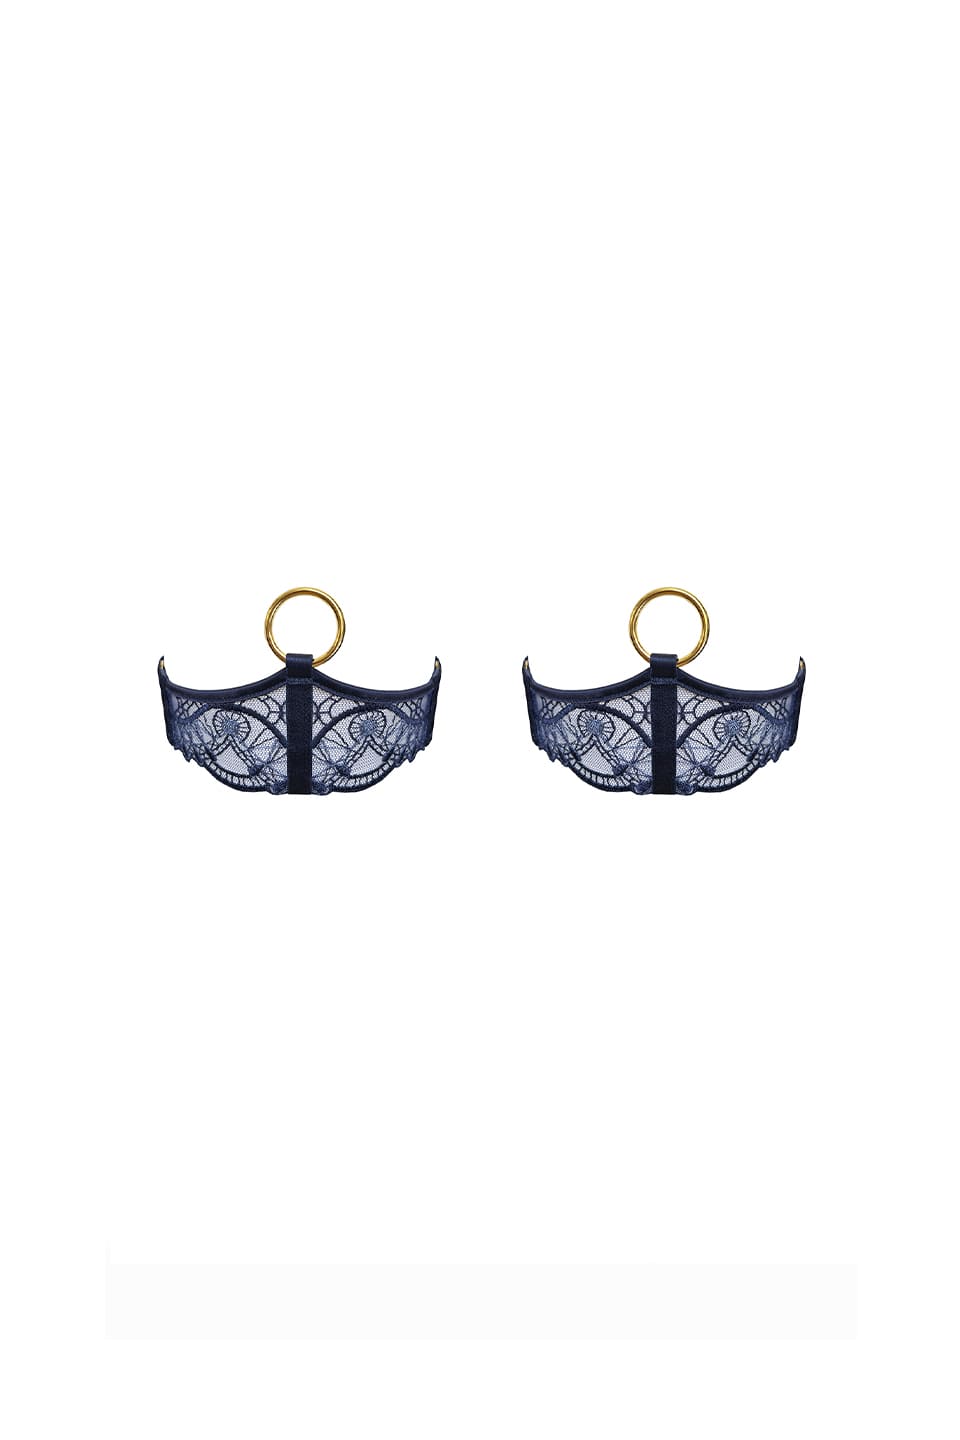 Shop online trendy Blue Lingerie accessories from Bordelle Fashion designer. Product gallery 1